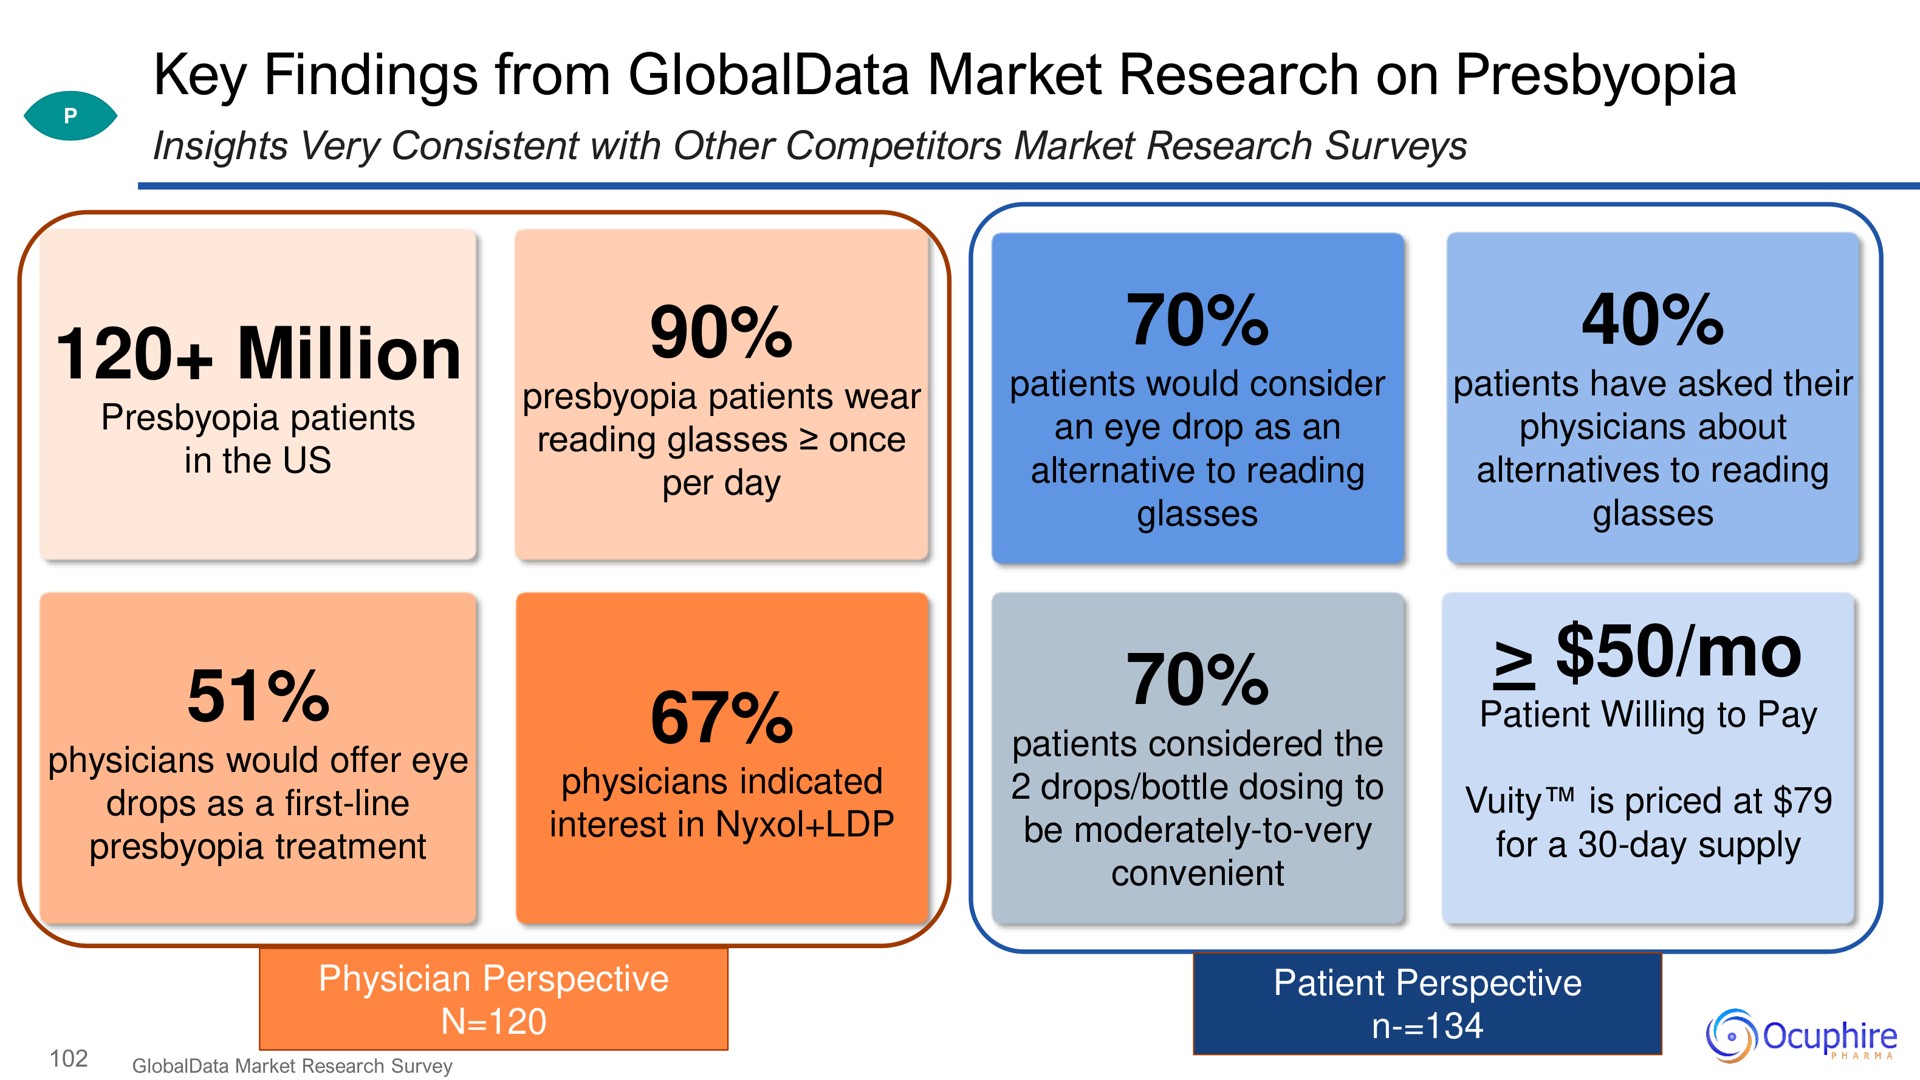 key findings from market research on presbyopia million | Ocuphire Pharma